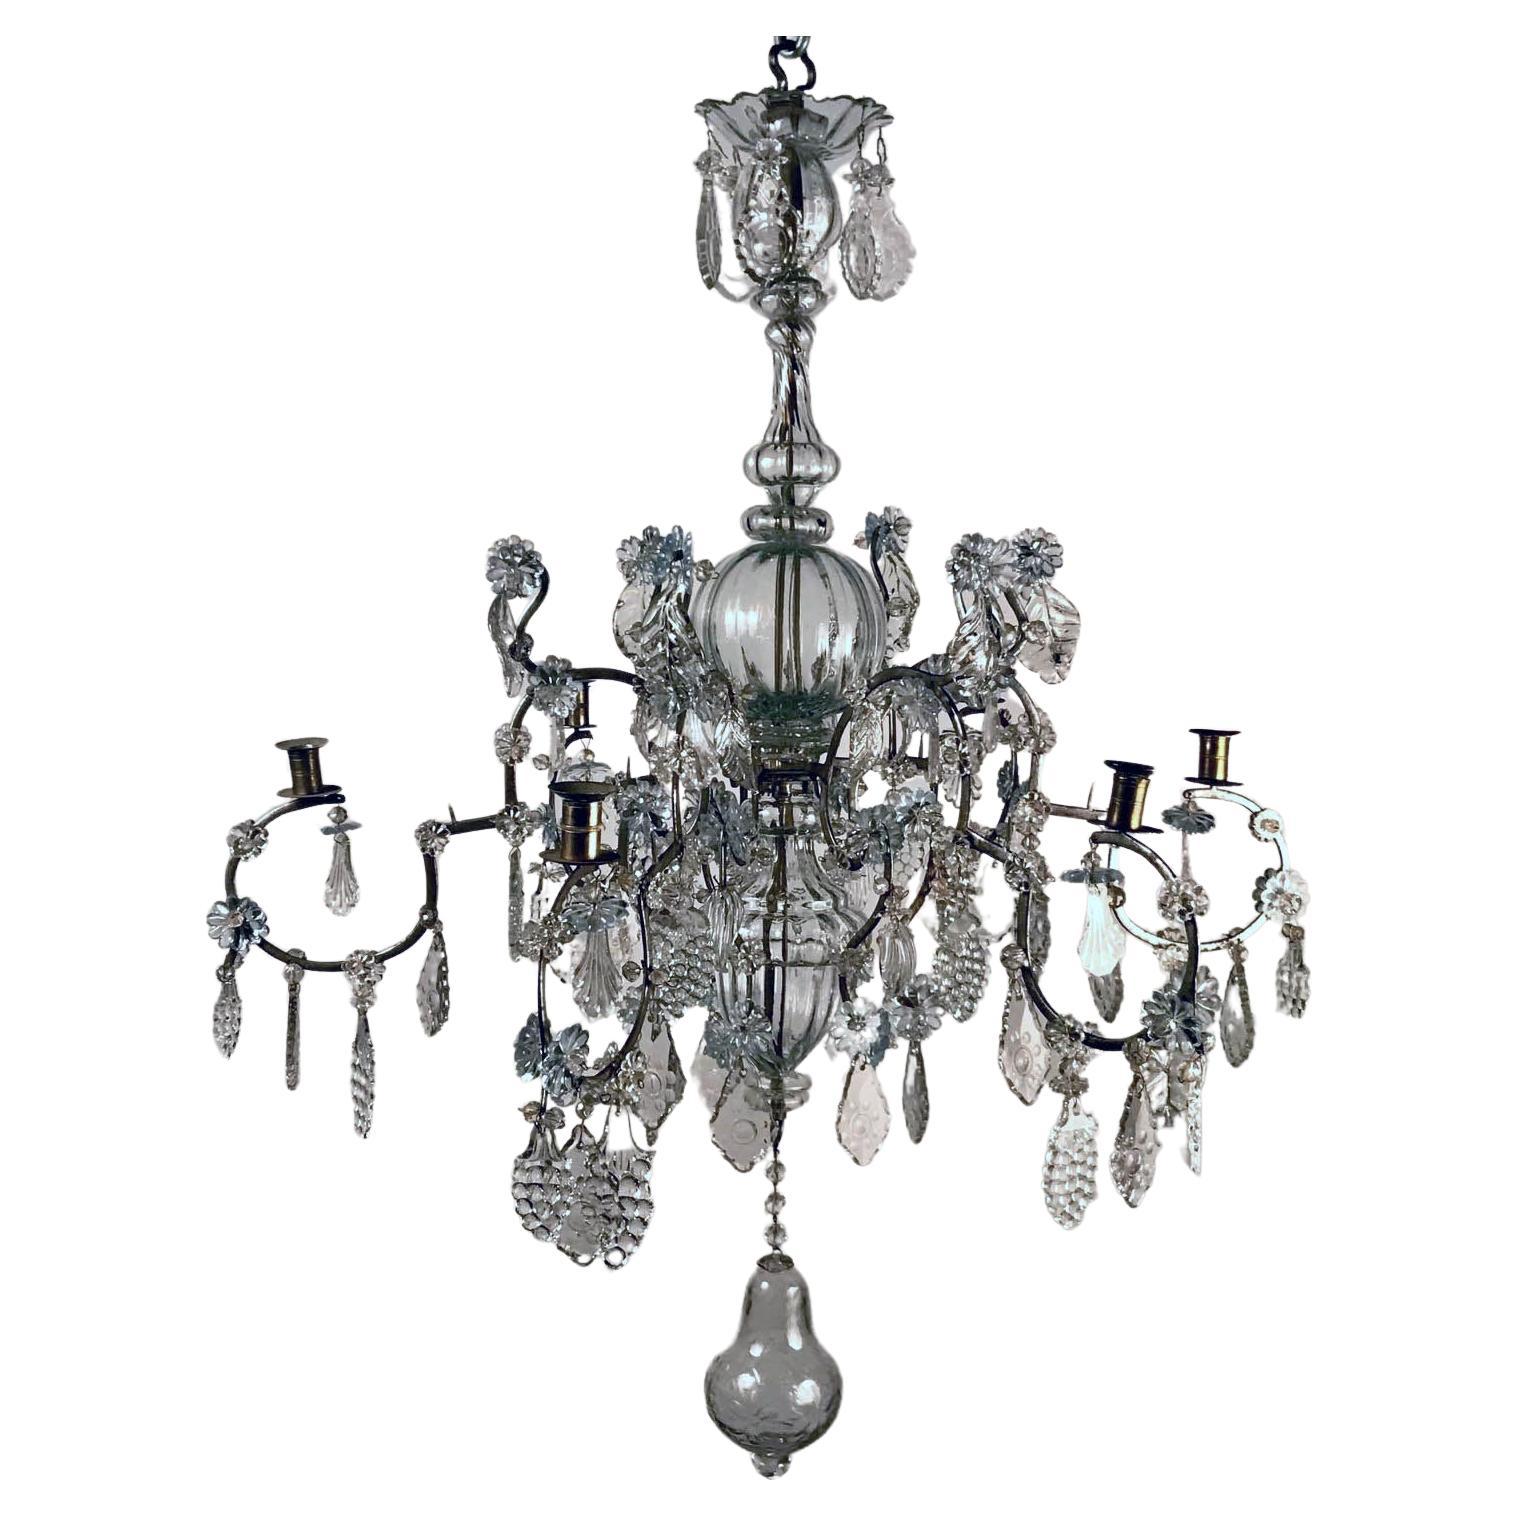 Baltic 18th Century Crystal and Iron Candle Chandelier